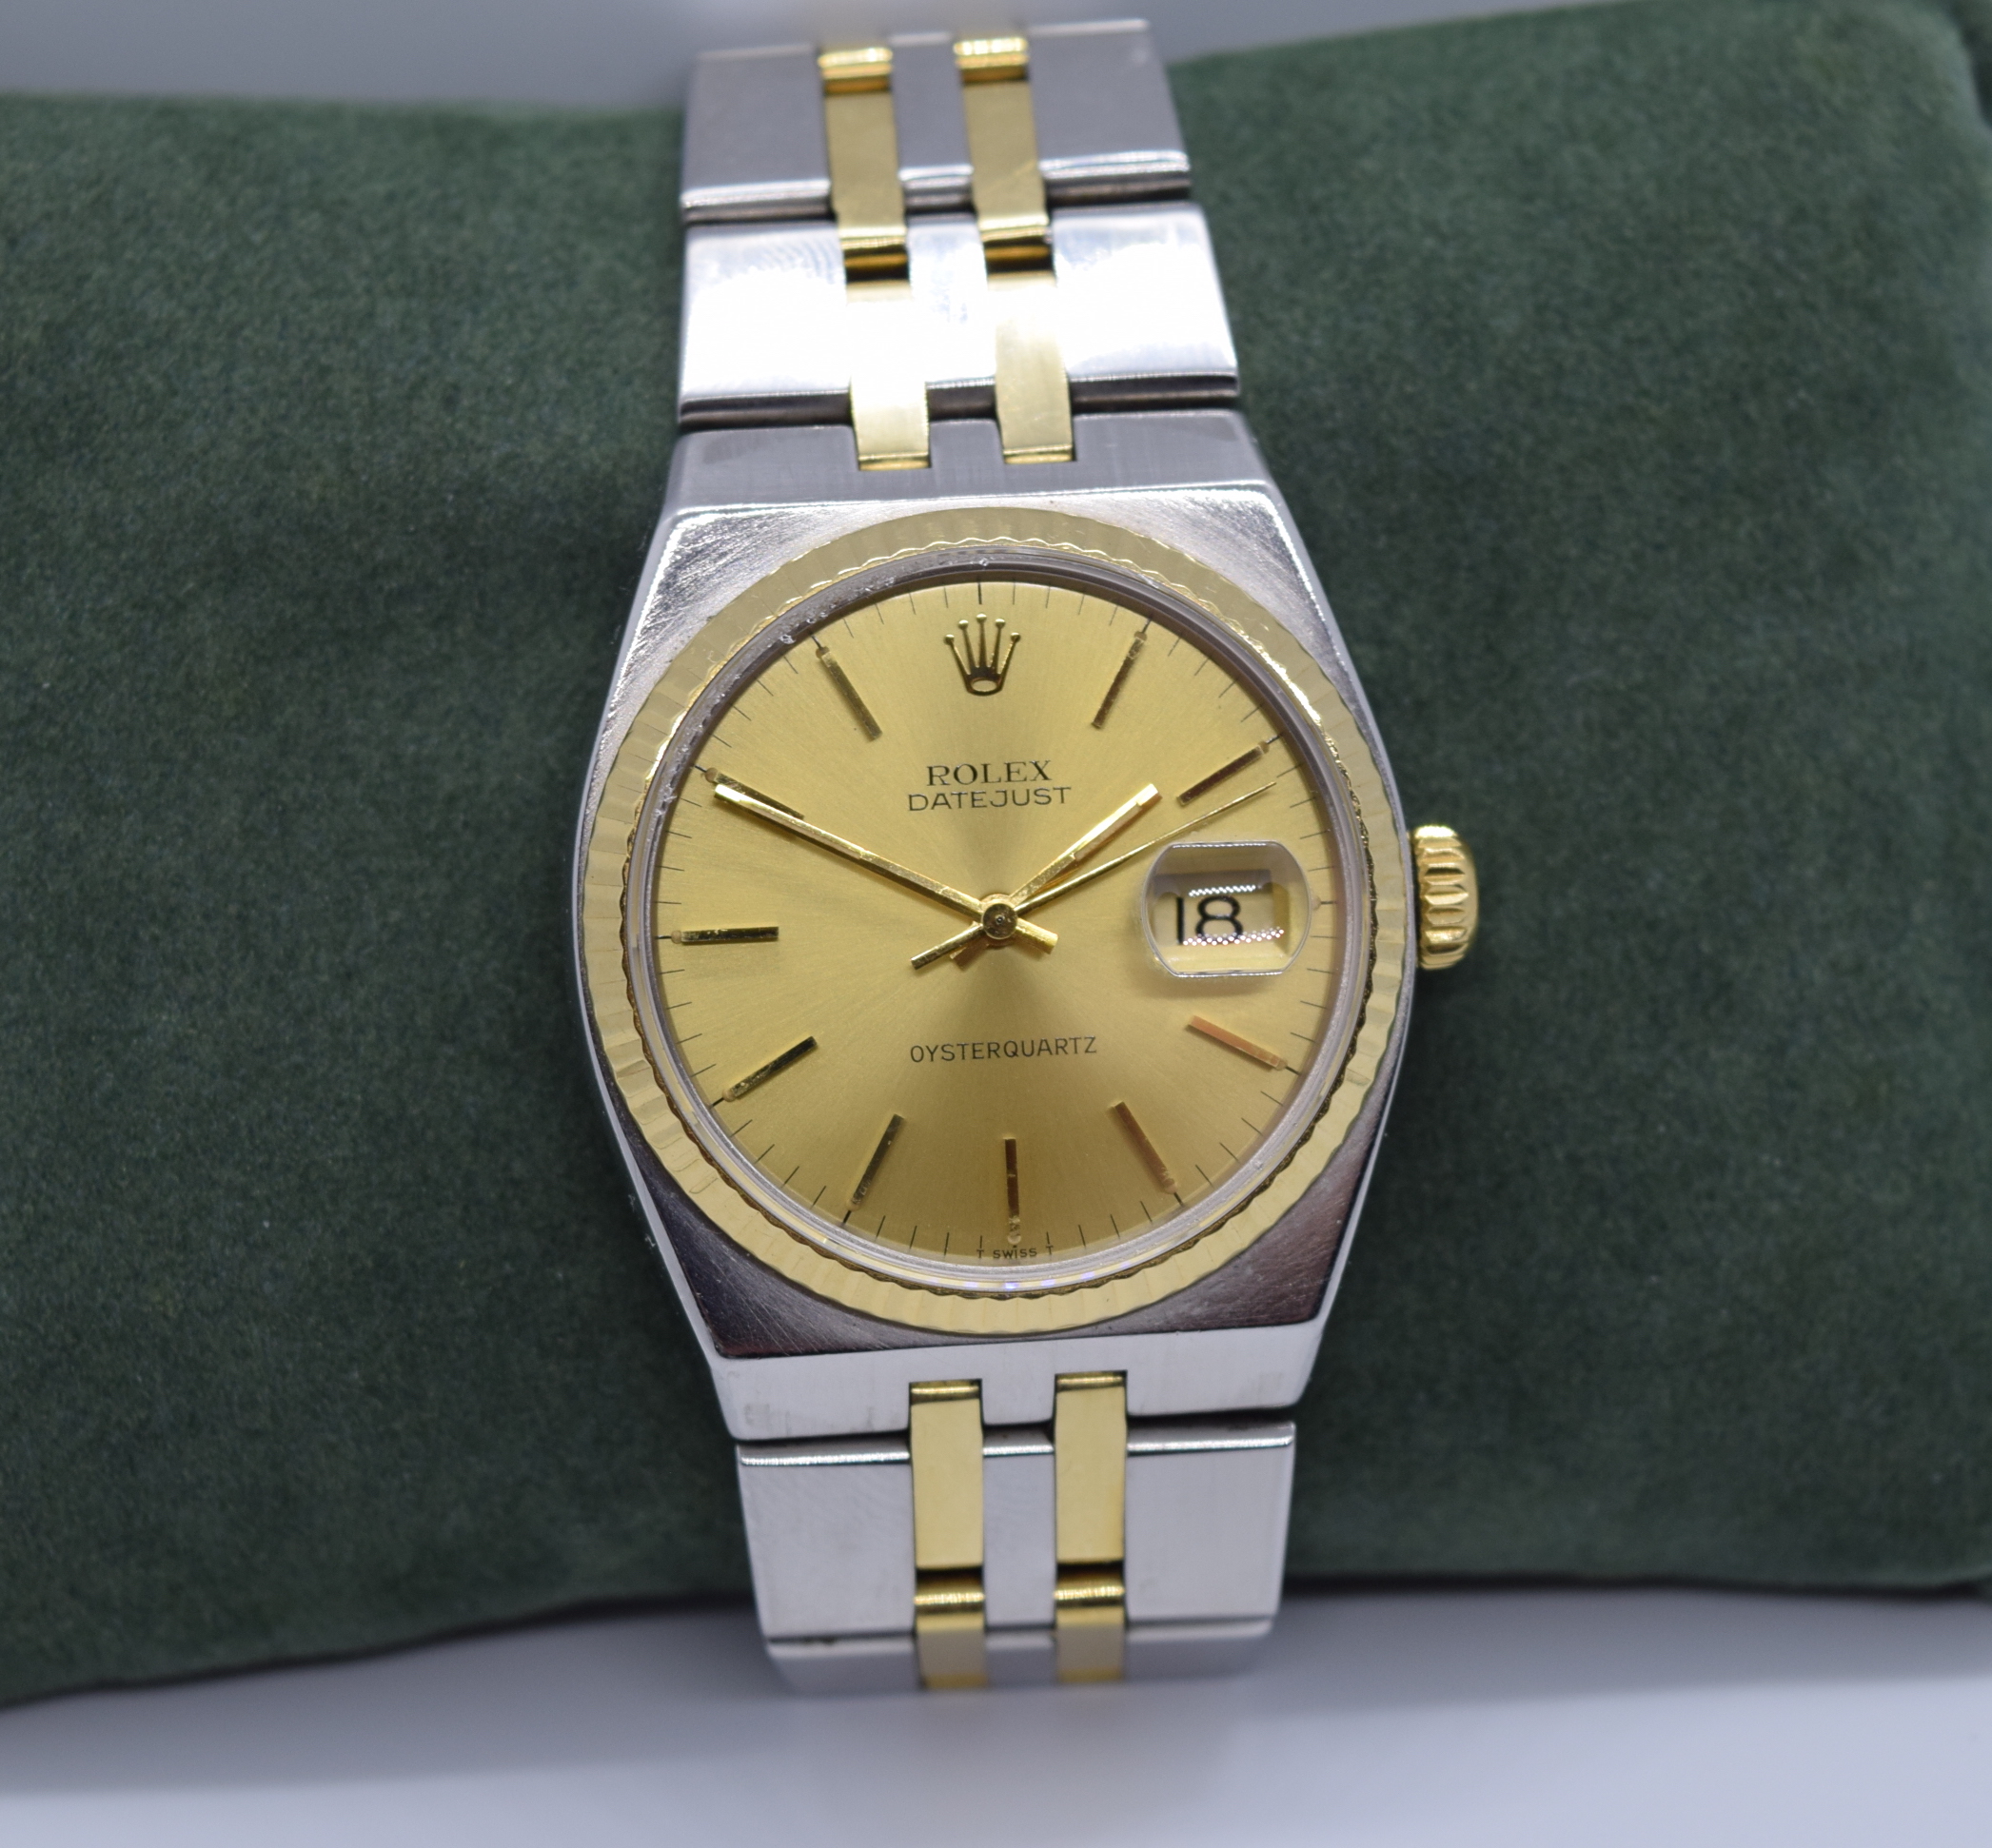 18K/ STEEL ROLEX DATEJUST OYSTERQUARTZ REF. 17013 (CHAMPAGNE DIAL) - 36MM - Image 3 of 9